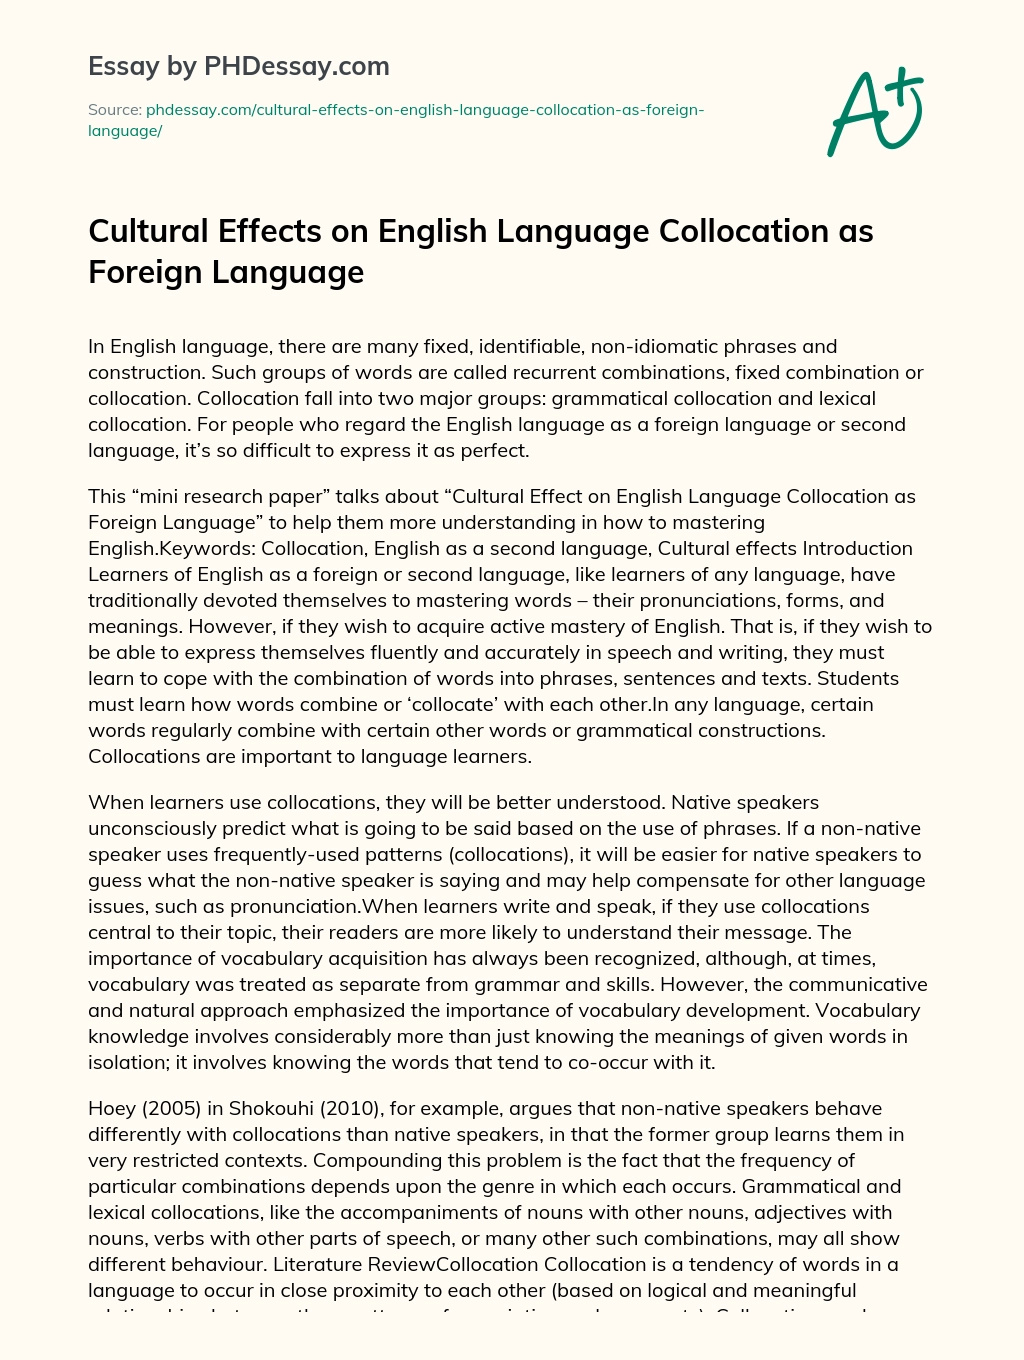 Cultural Effects on English Language Collocation as Foreign Language essay